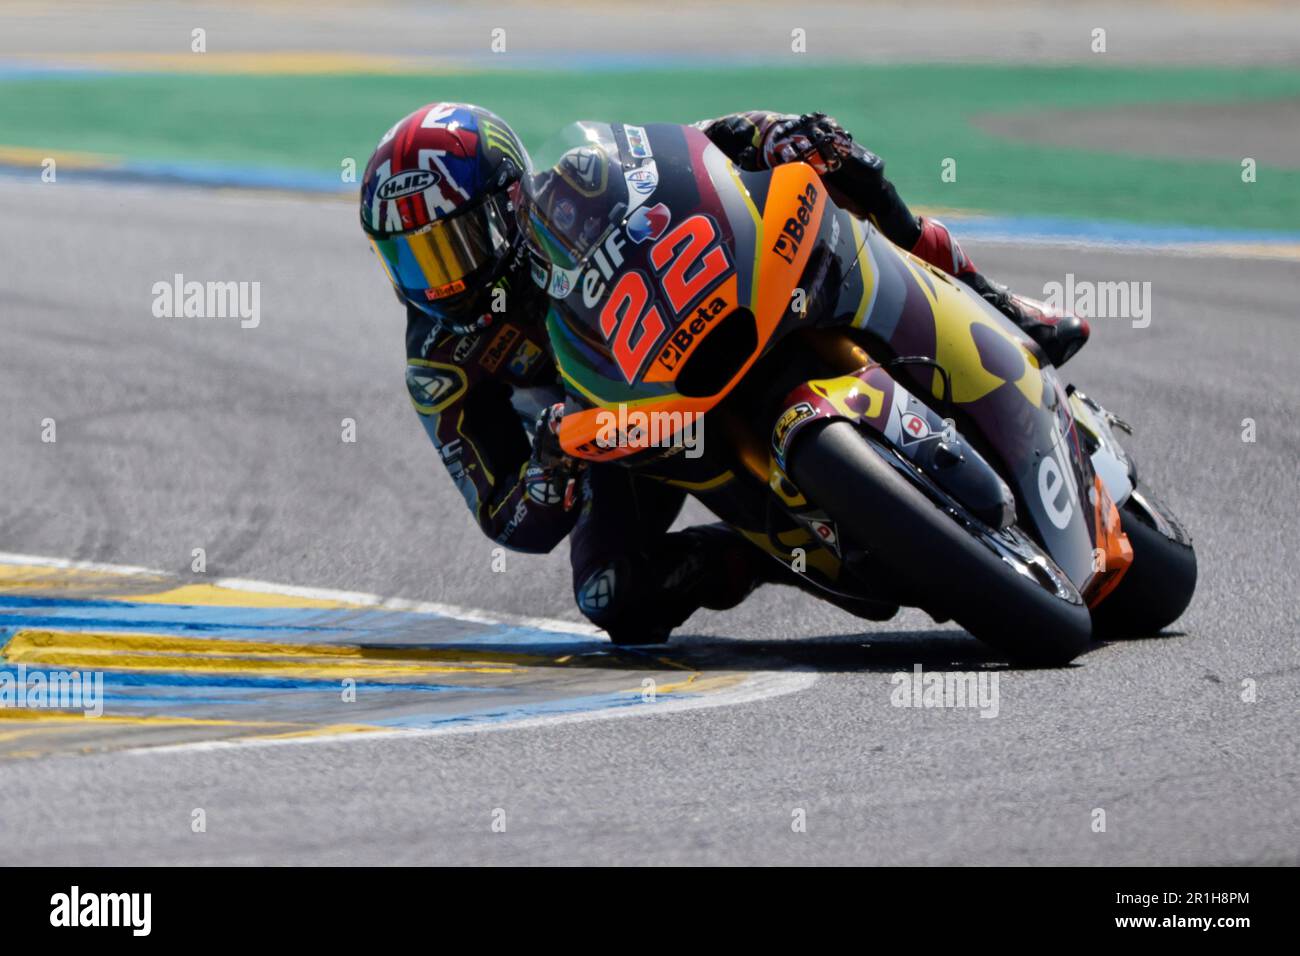 Britain's rider Sam Lowes of the ELF Marc VDS Racing Team steers his  motorcycle during the Moto 2 race of the French Motorcycle Grand Prix at  the Le Mans racetrack, in Le